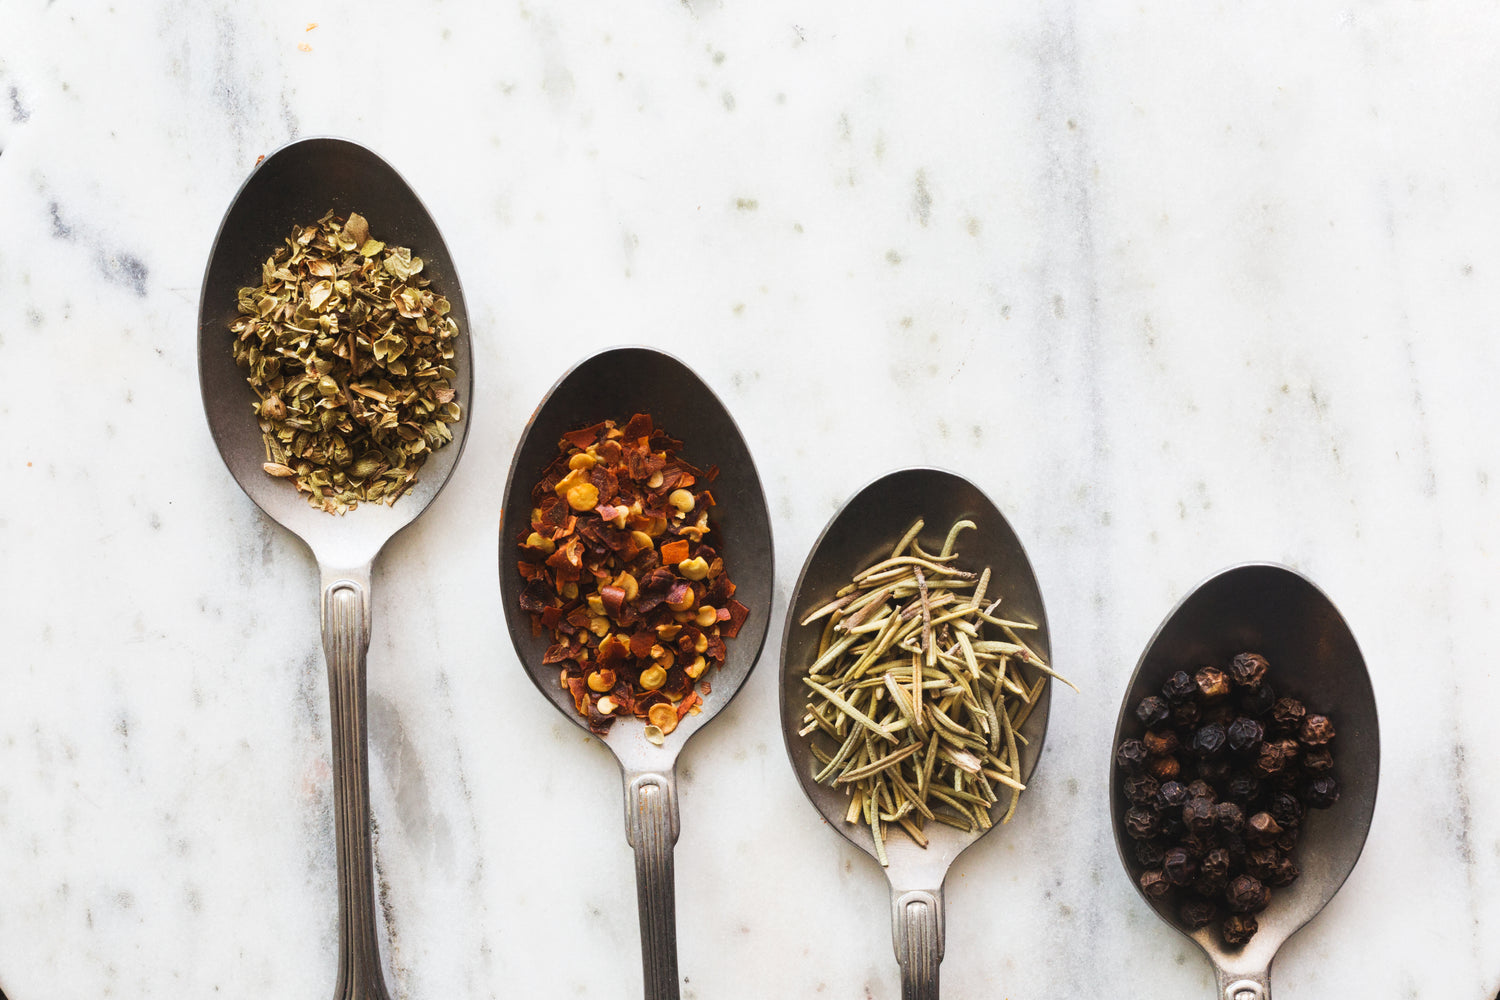 Dried herbs delicately arranged on shiny metal spoons, showcasing the exquisite variety and quality of our wholesale offerings.